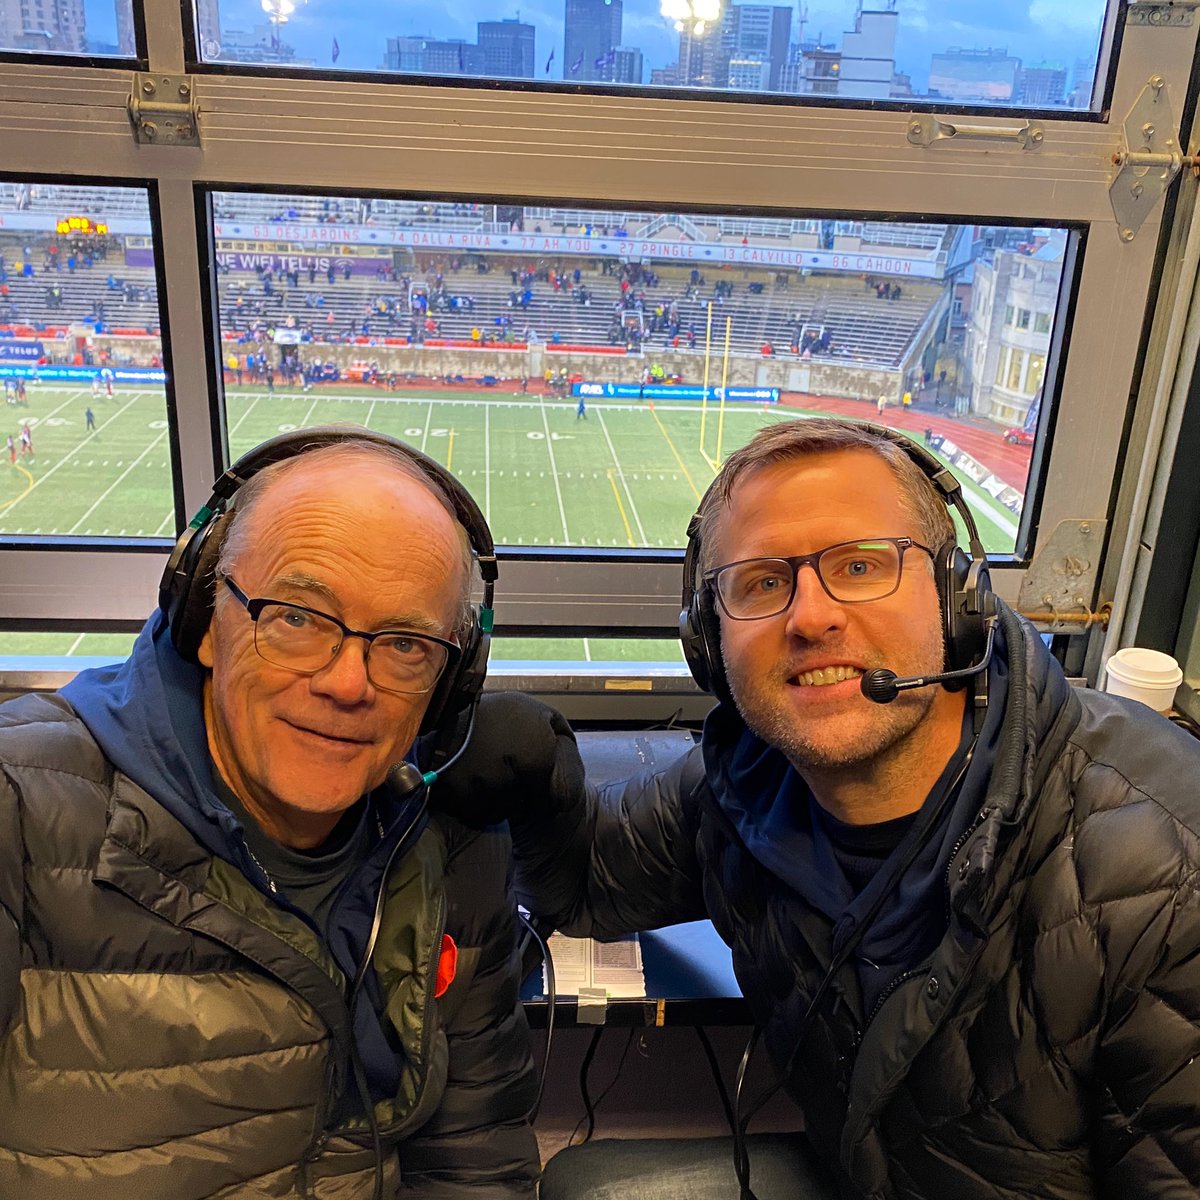 Only 2 more games together remain for this dynamic duo @BobIrvingCJOB @DougBrown97  #legends #GoBombers #ForTheW #HallofFamers @CFL @Wpg_BlueBombers